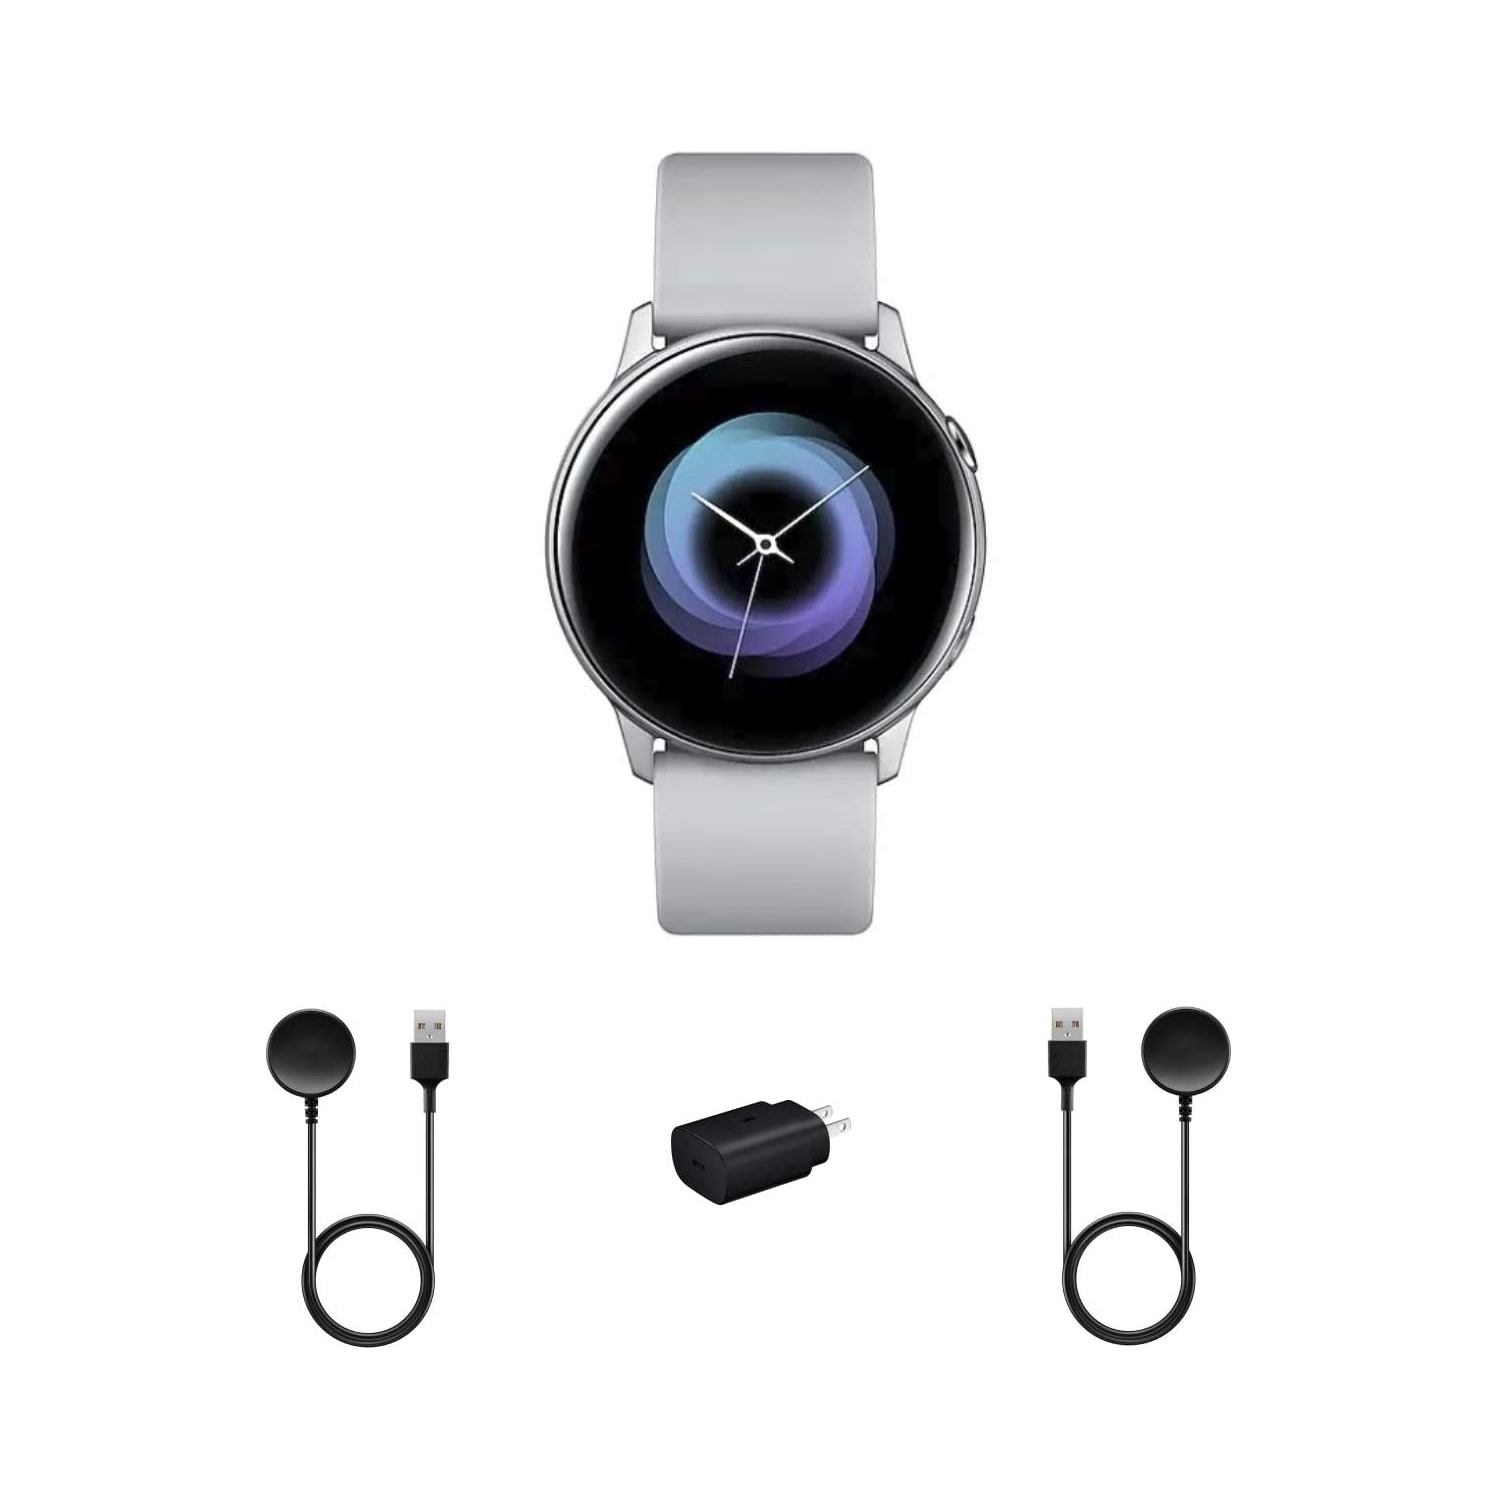 Refurbished (Excellent) - Samsung Galaxy Watch Active2 - 44mm - Silver/Gray - With 2 Charging Docks (GPS + Cellular)